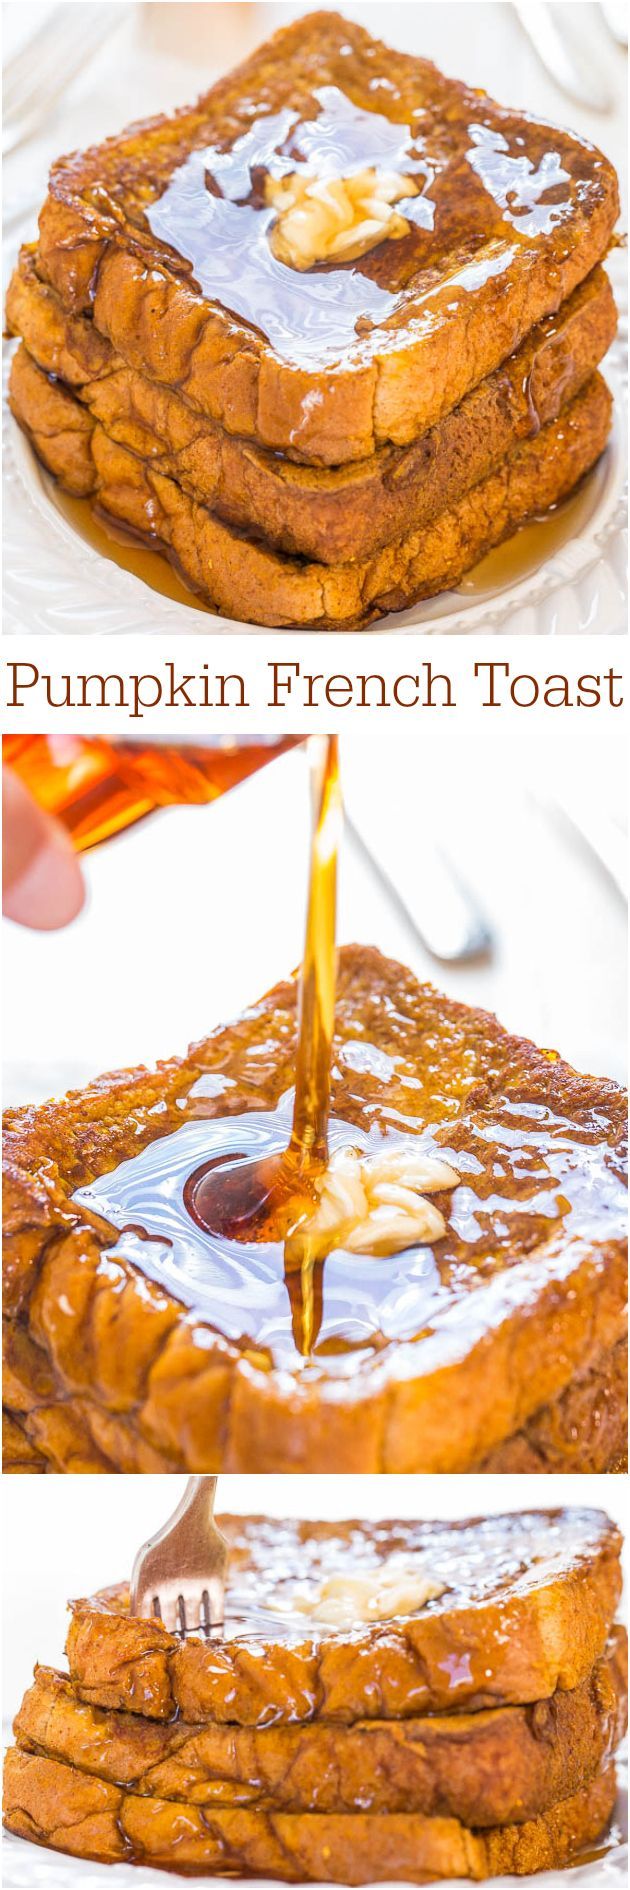 Pumpkin French Toast – Dont even think about skipping breakfast when you can have this! Its